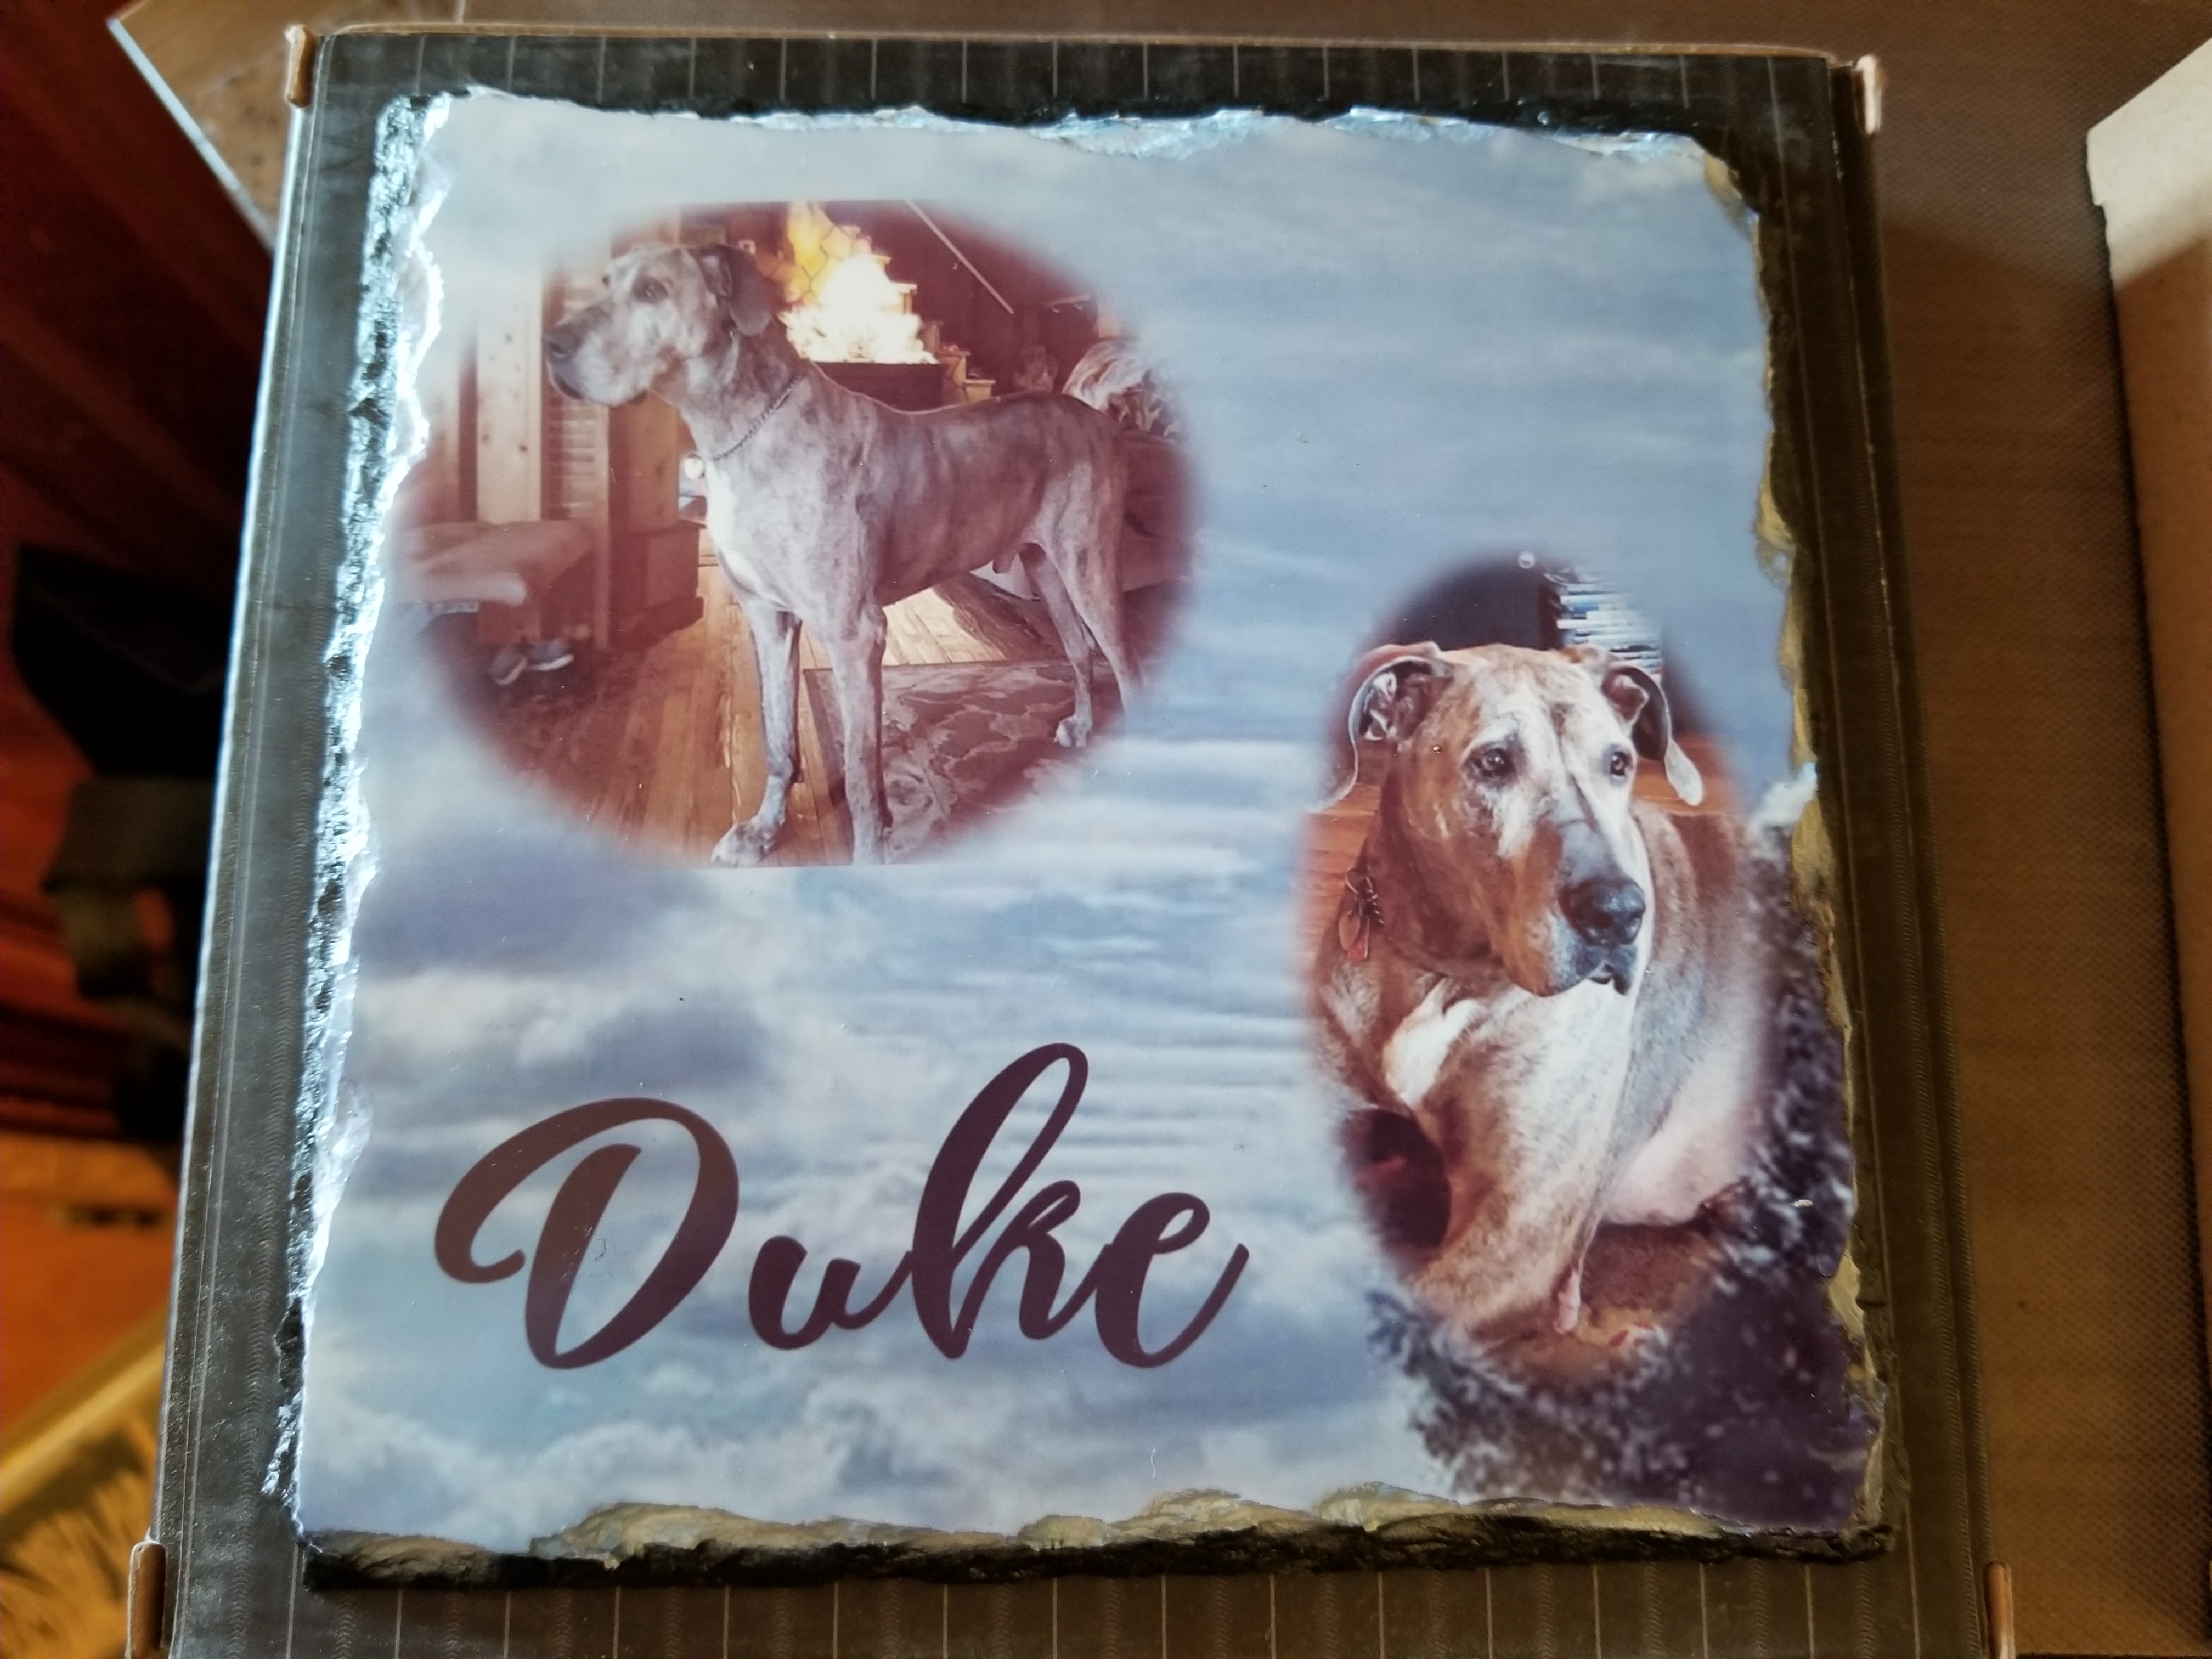 In Memory of .. Duke made with sublimation printing